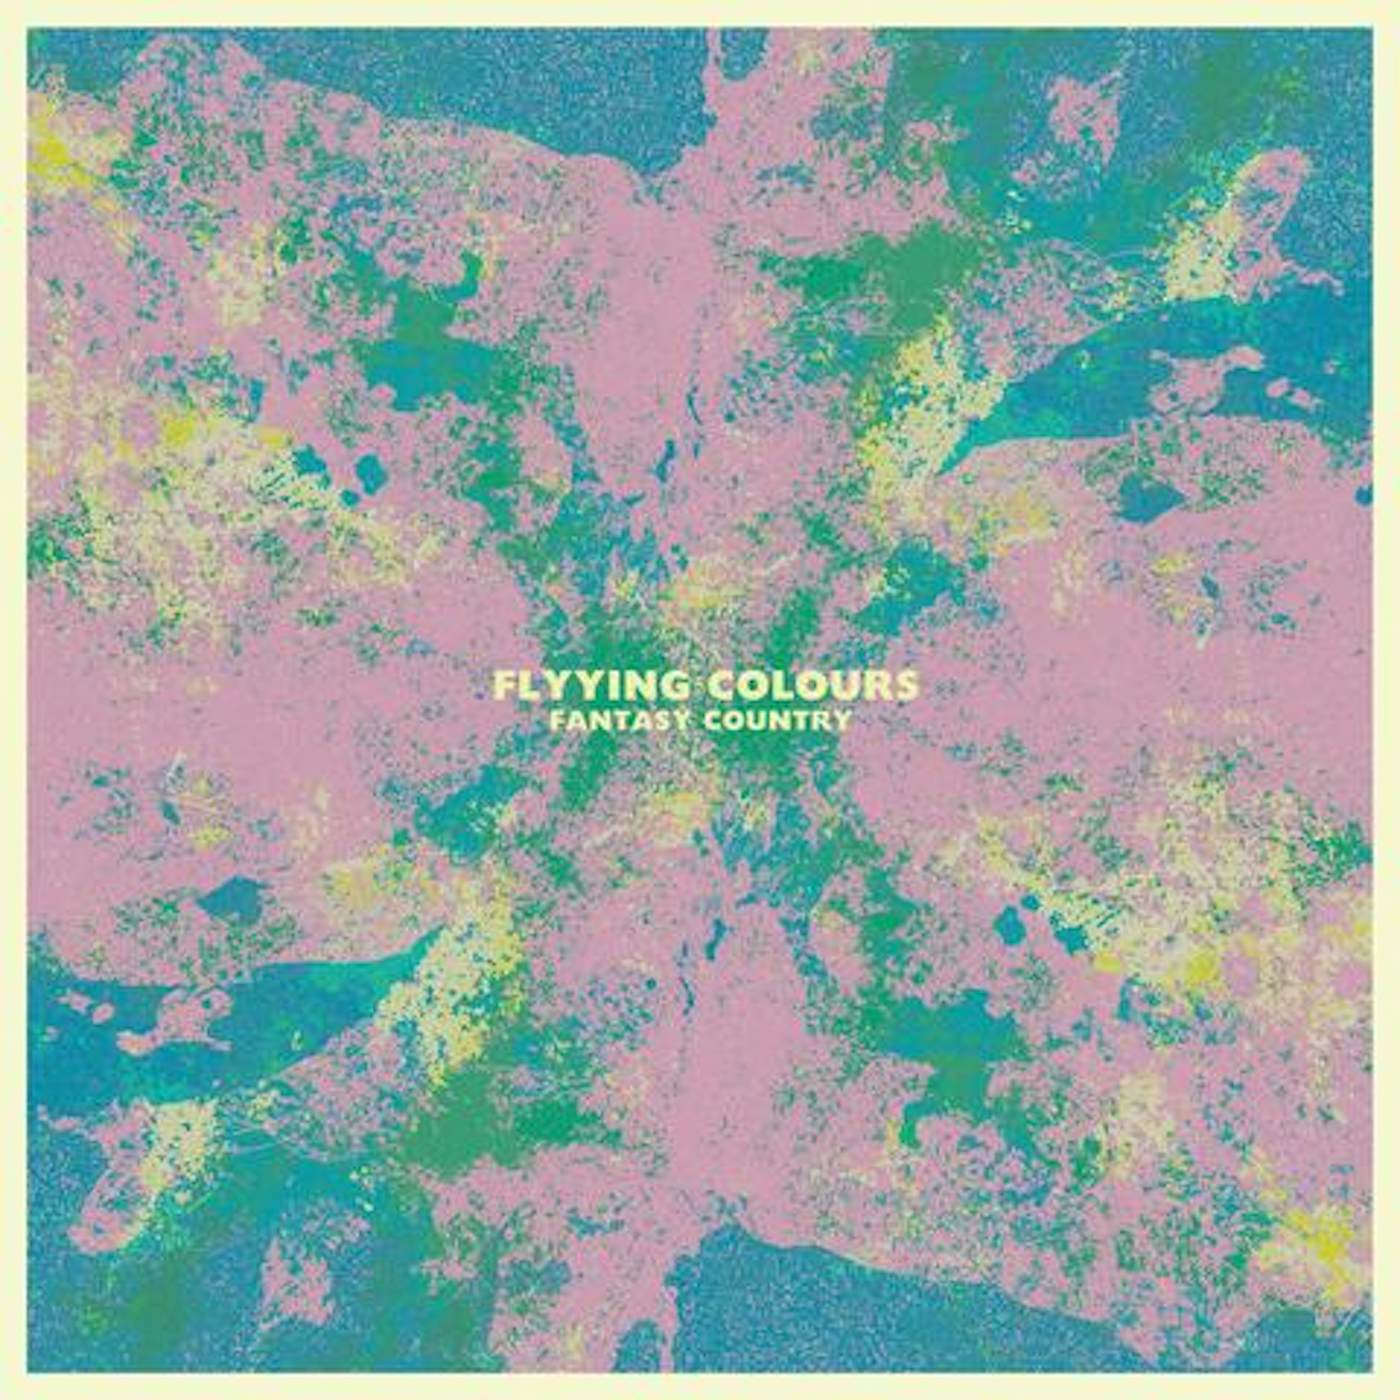 Flyying Colours Fantasy Country Vinyl Record